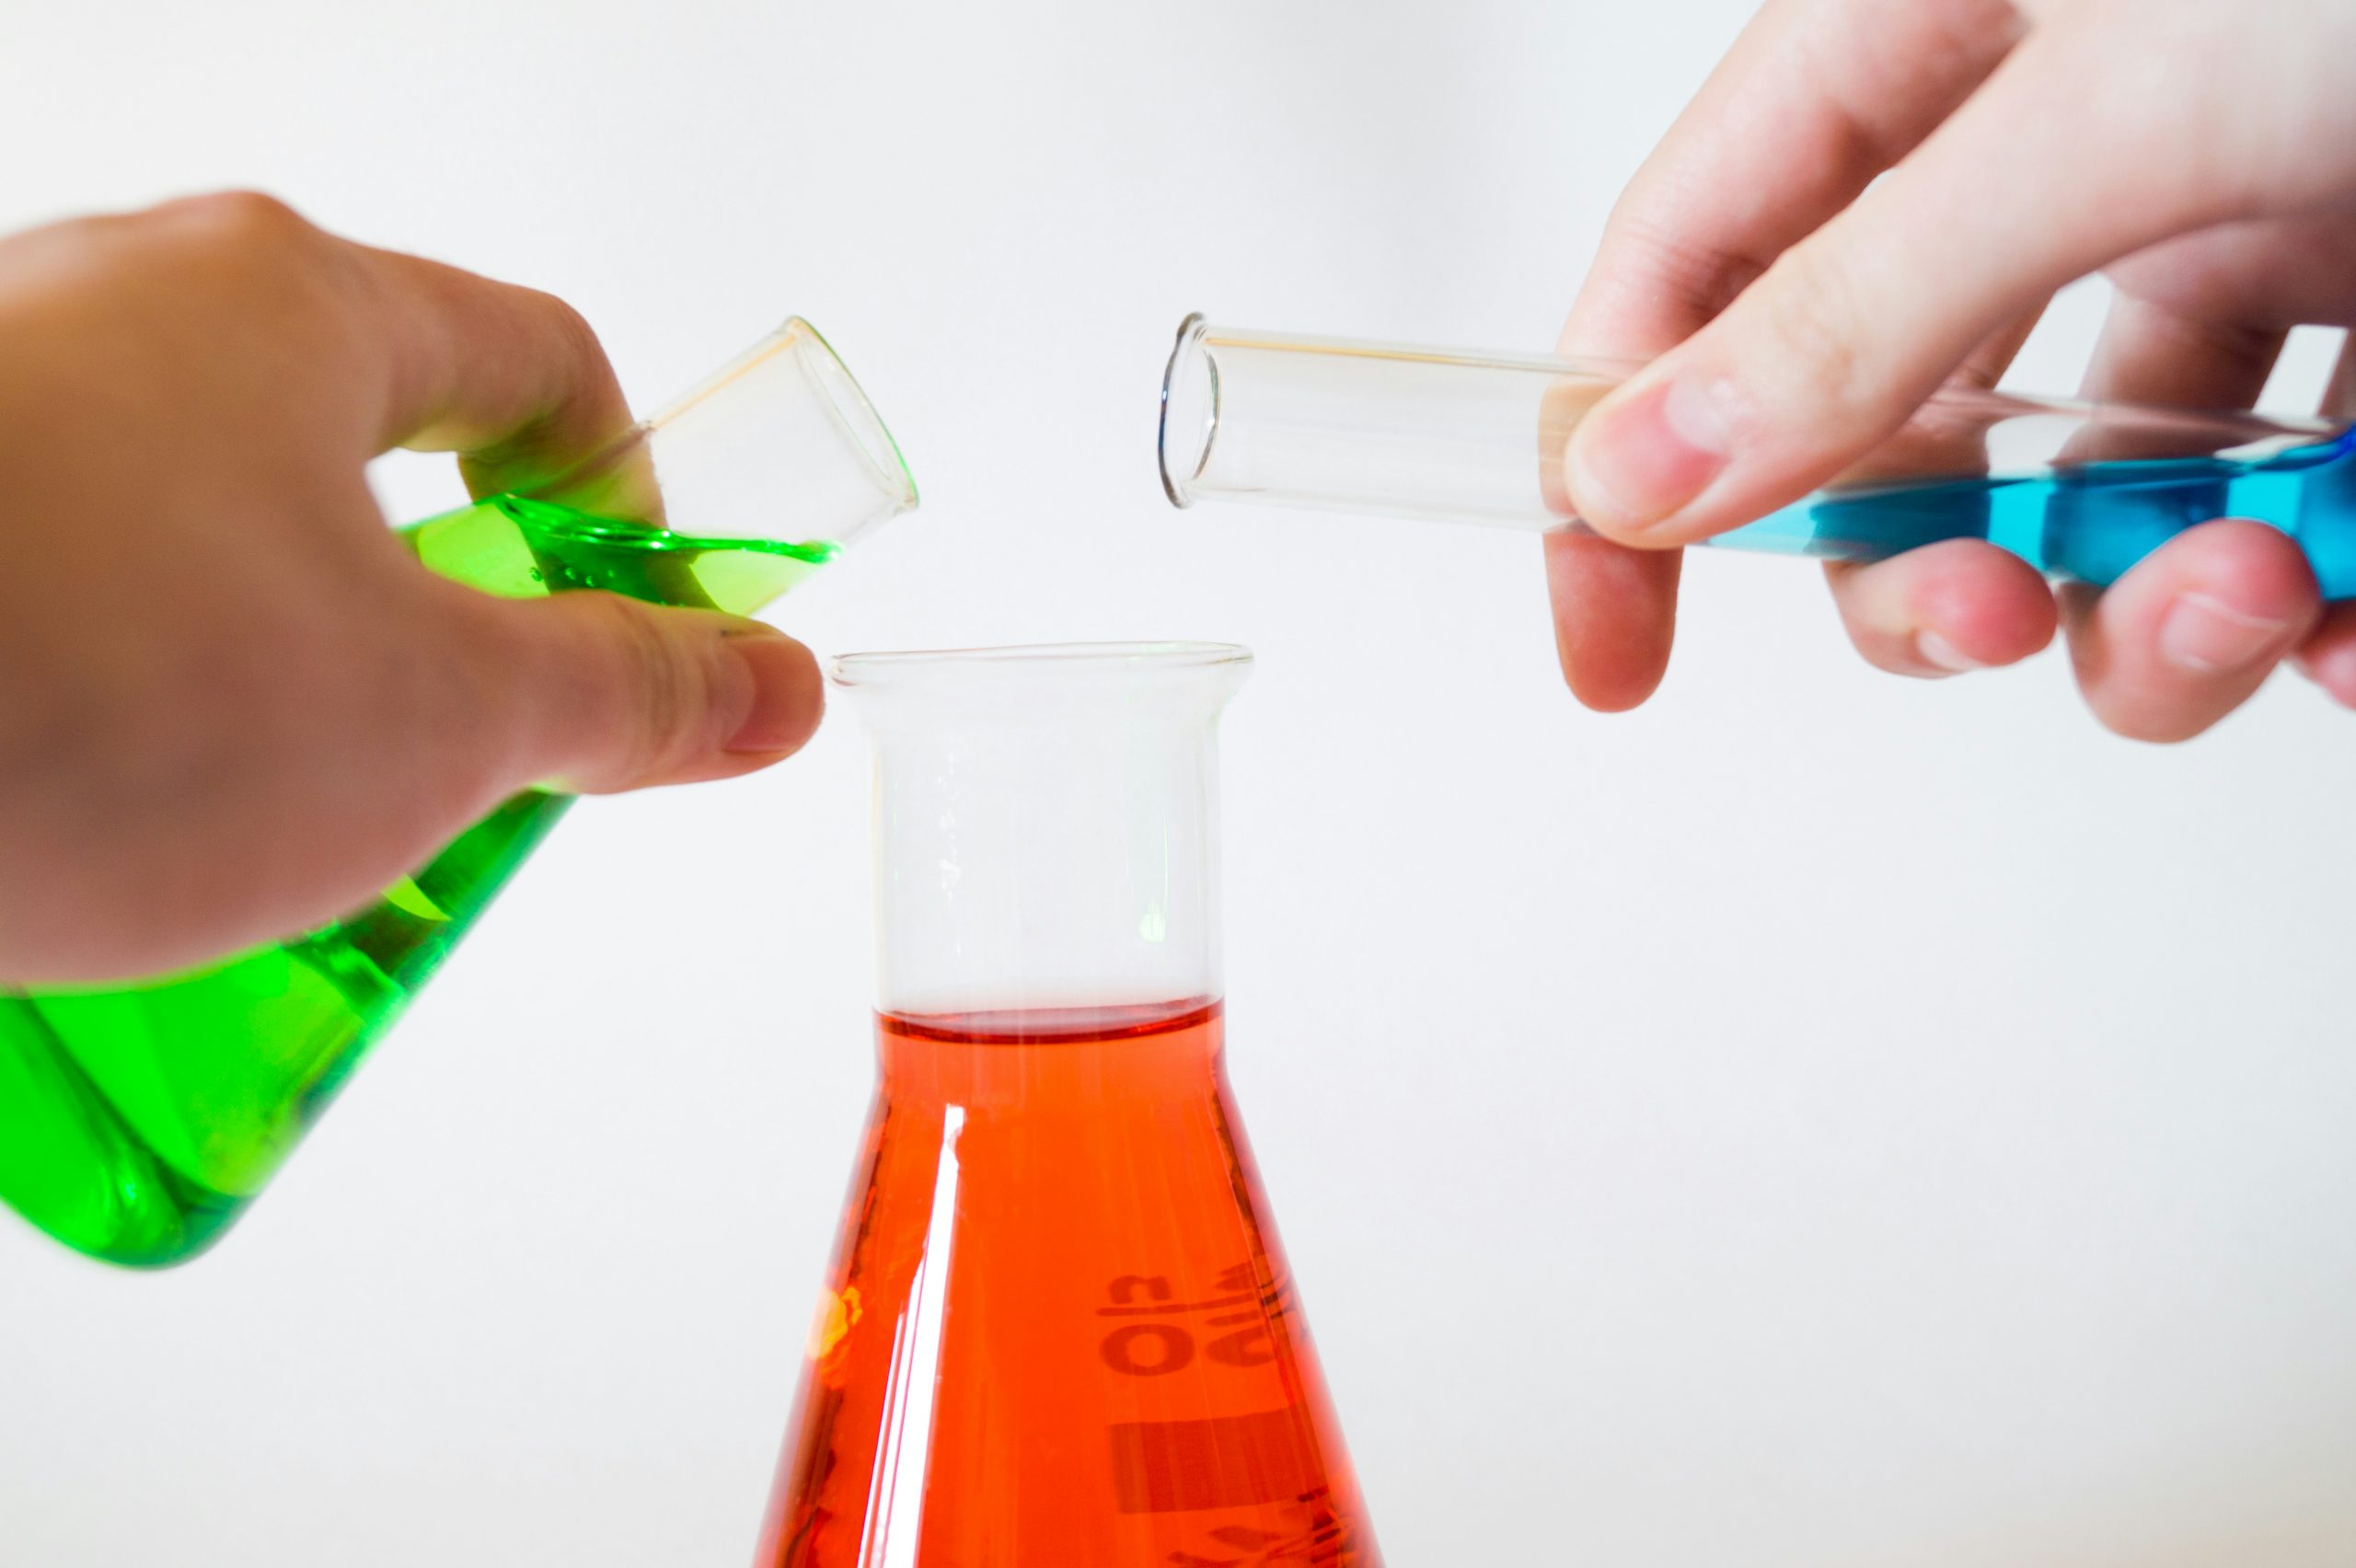 Fun Science: Spark kids' environmental curiosity with fun science experiments